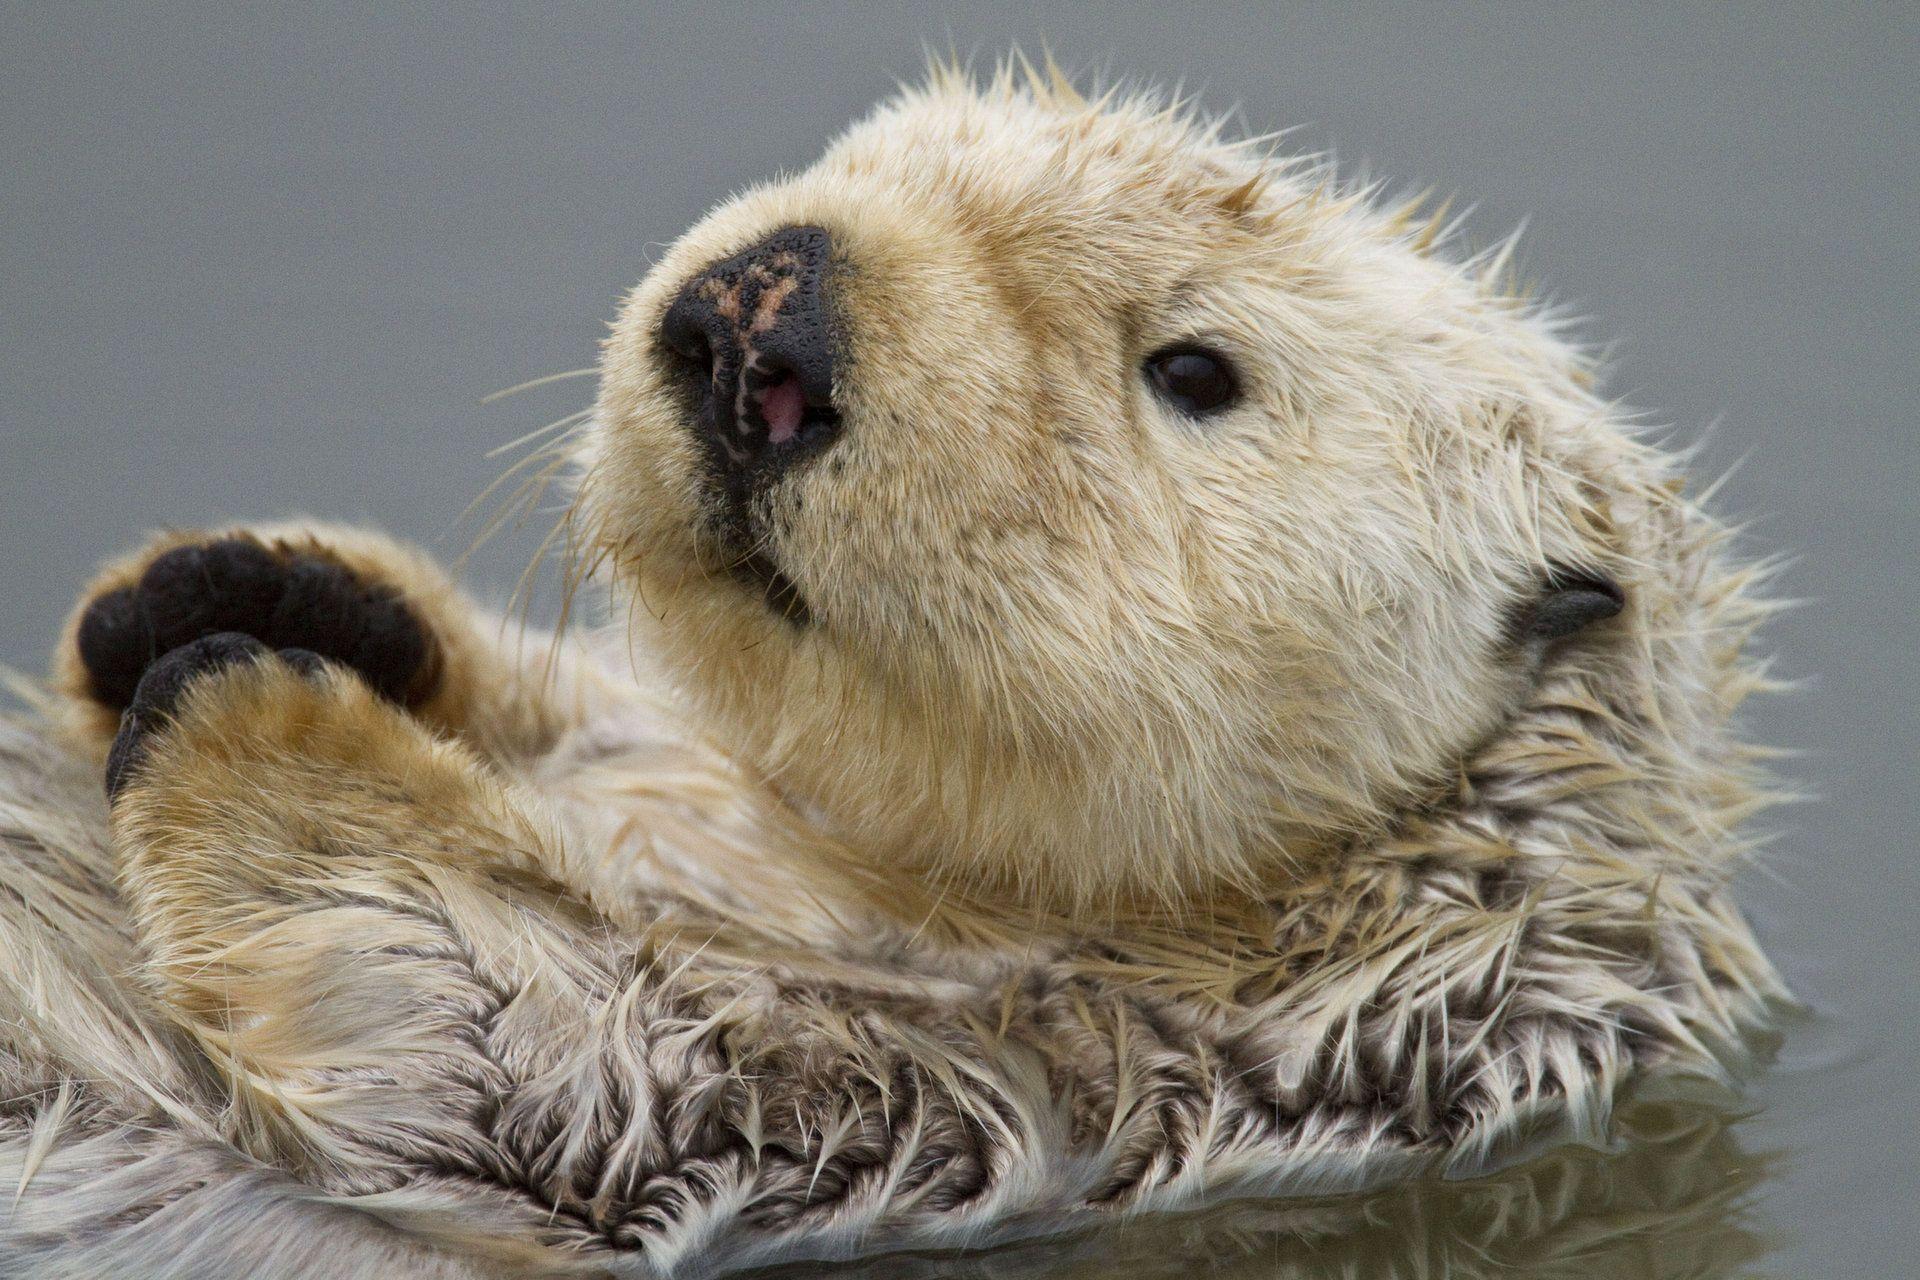 Could sea otters be the key to bovine TB? Focusing on Wildlife